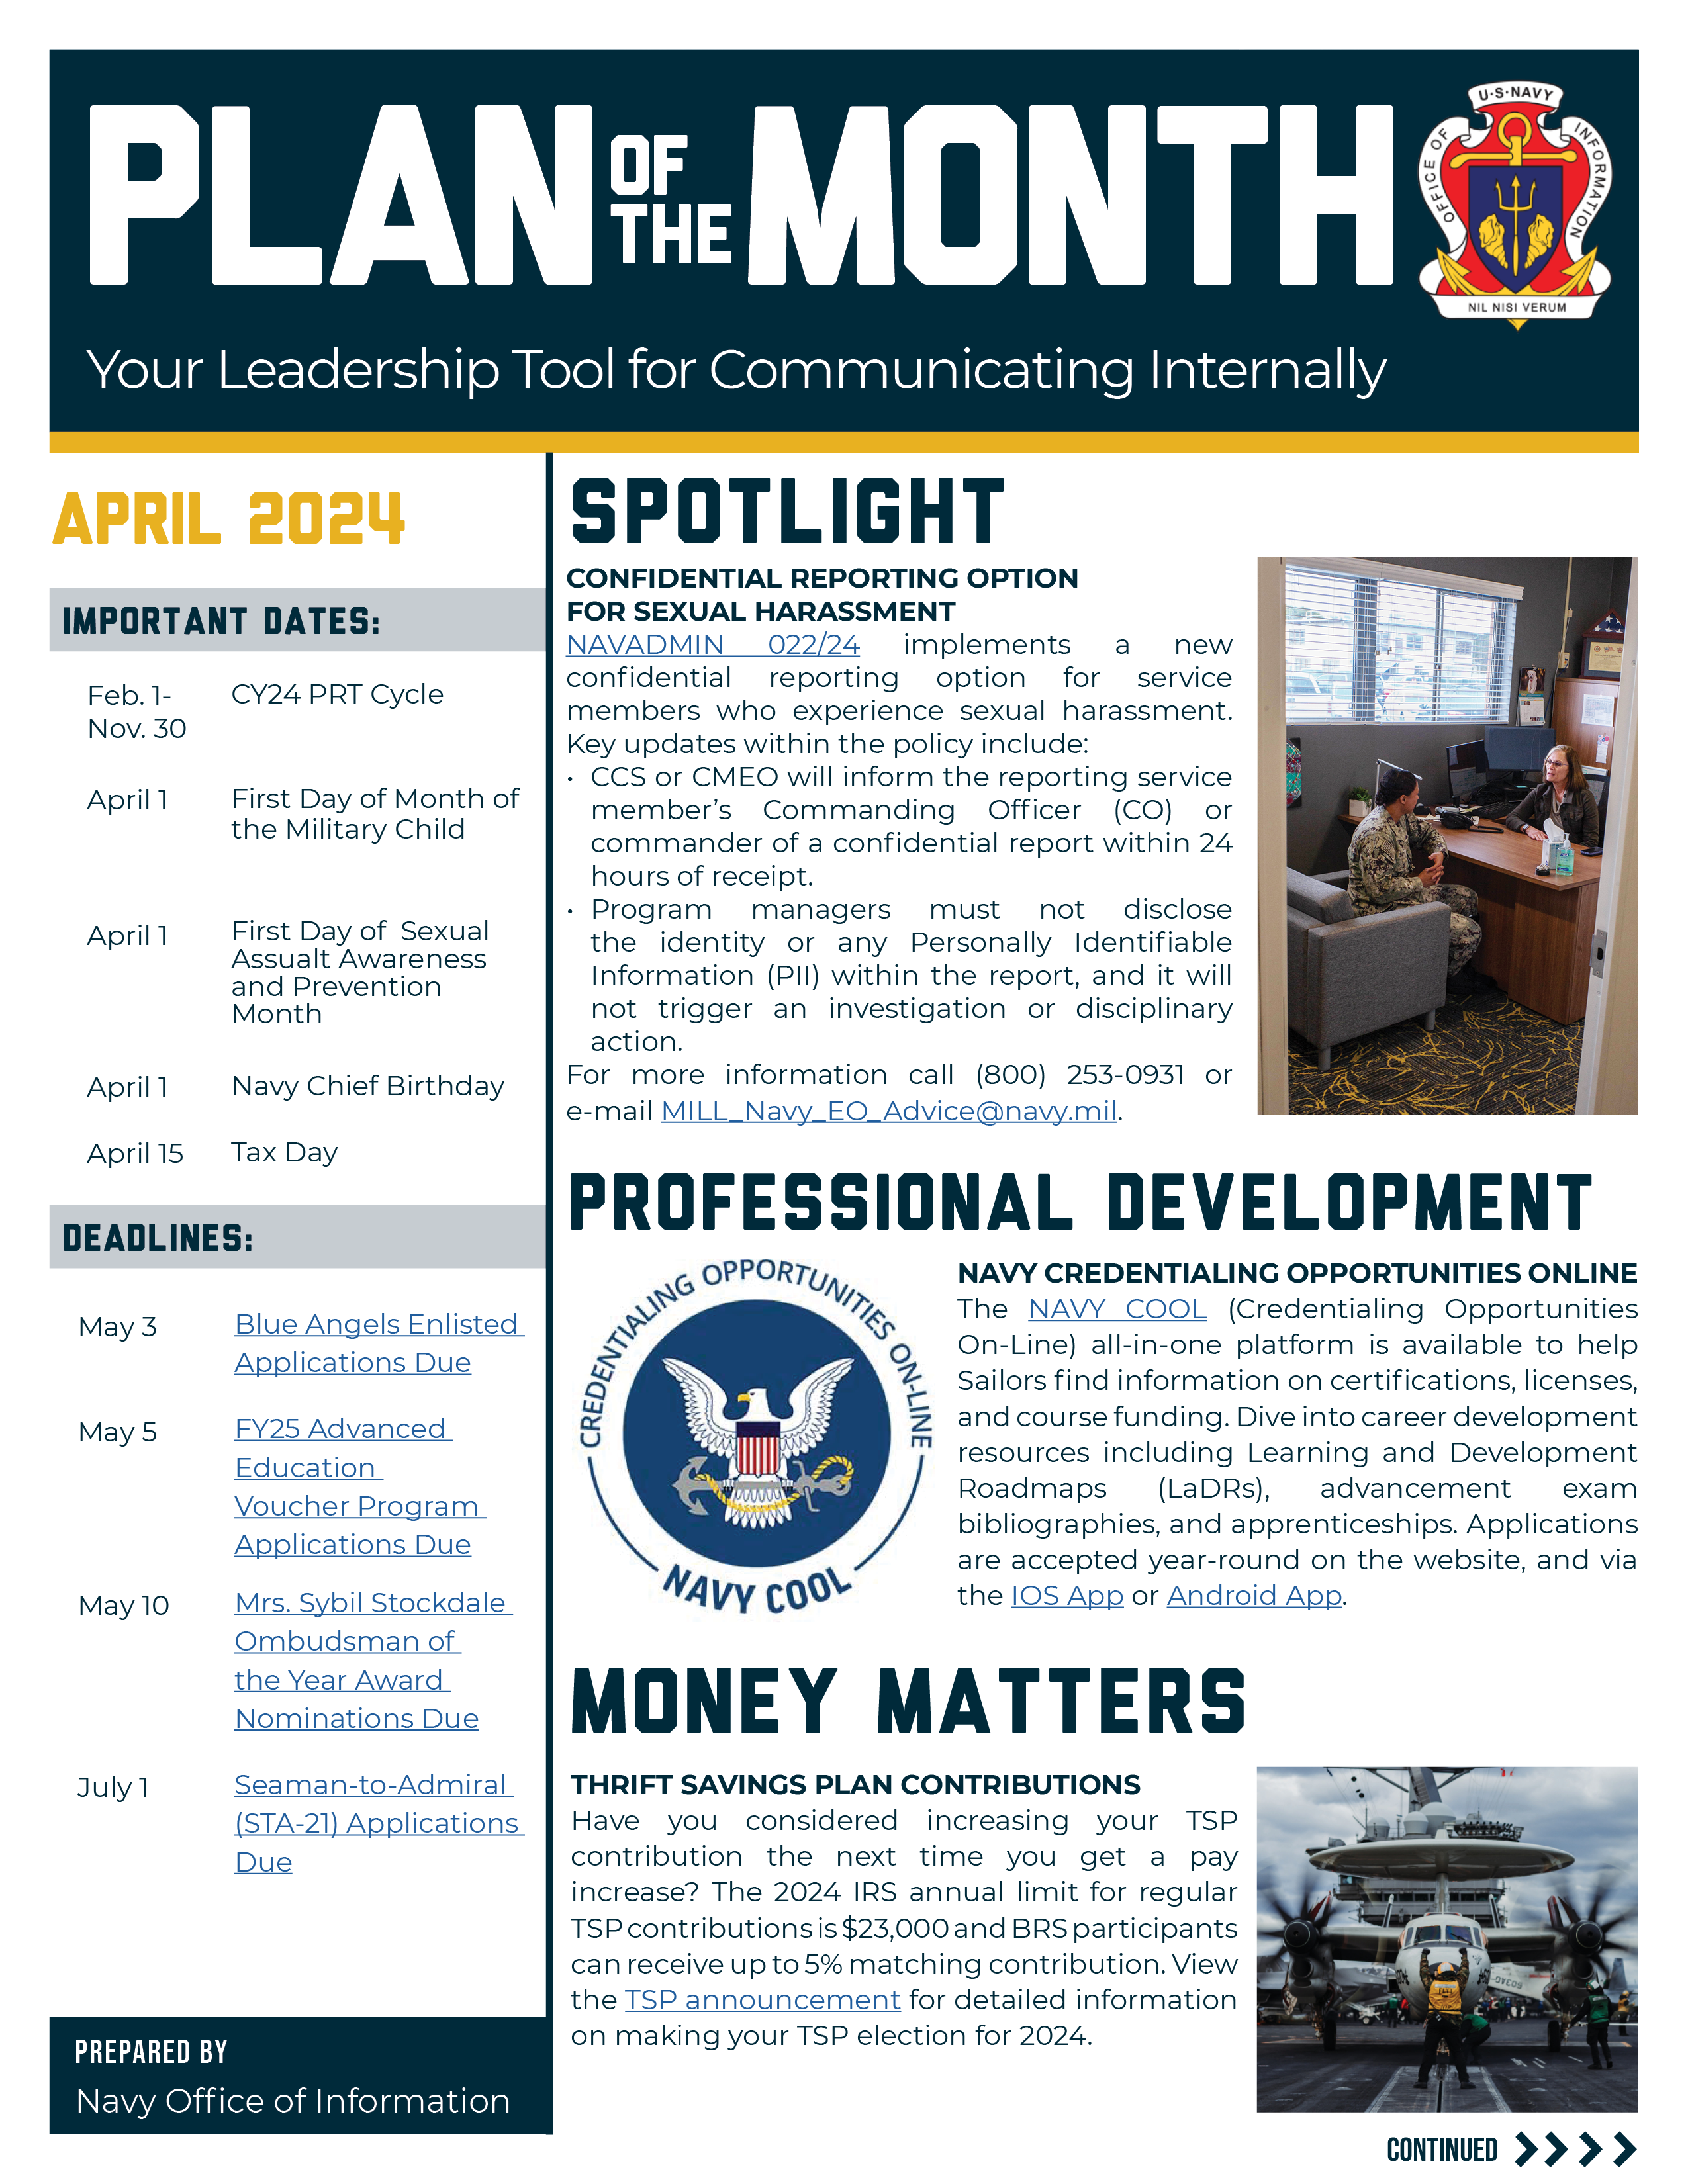 Plan of the Month front cover graphic